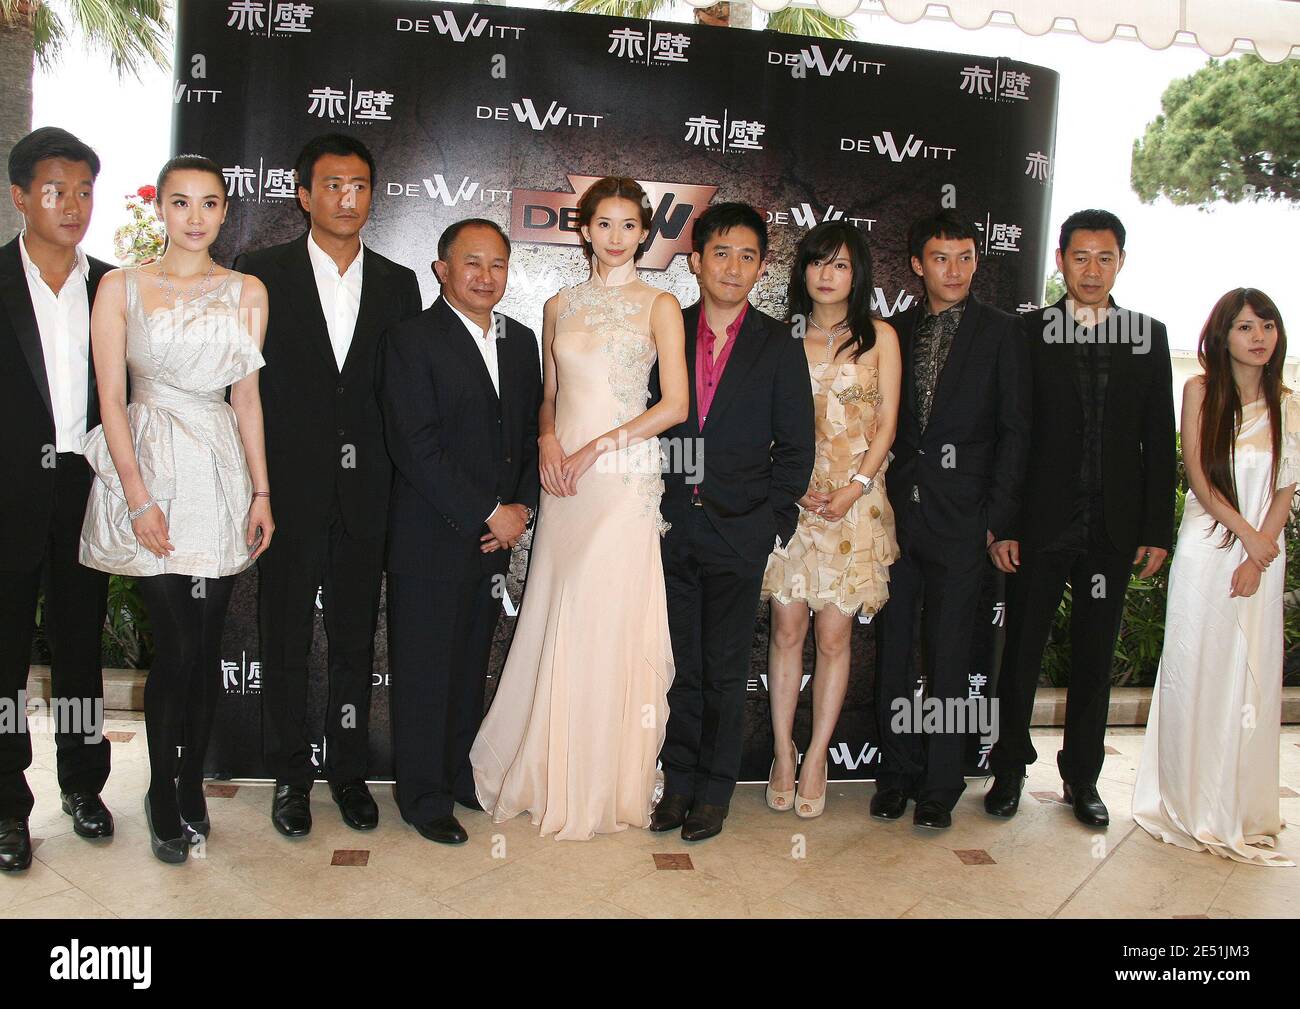 Director John Woo (4th L) poses with cast members (L-R) Tong Dawei, Song Jia, Hu Jun, Chiling li, Tony Leung, Zhao Wei, Chang Chen, Zhang Fengyi and unidentified guest at a photocall for the film 'Red Cliff' during the 61st Cannes Film Festival in Cannes, France on May 19, 2008. Photo by Denis Guignebourg/ABACAPRESS.COM Stock Photo